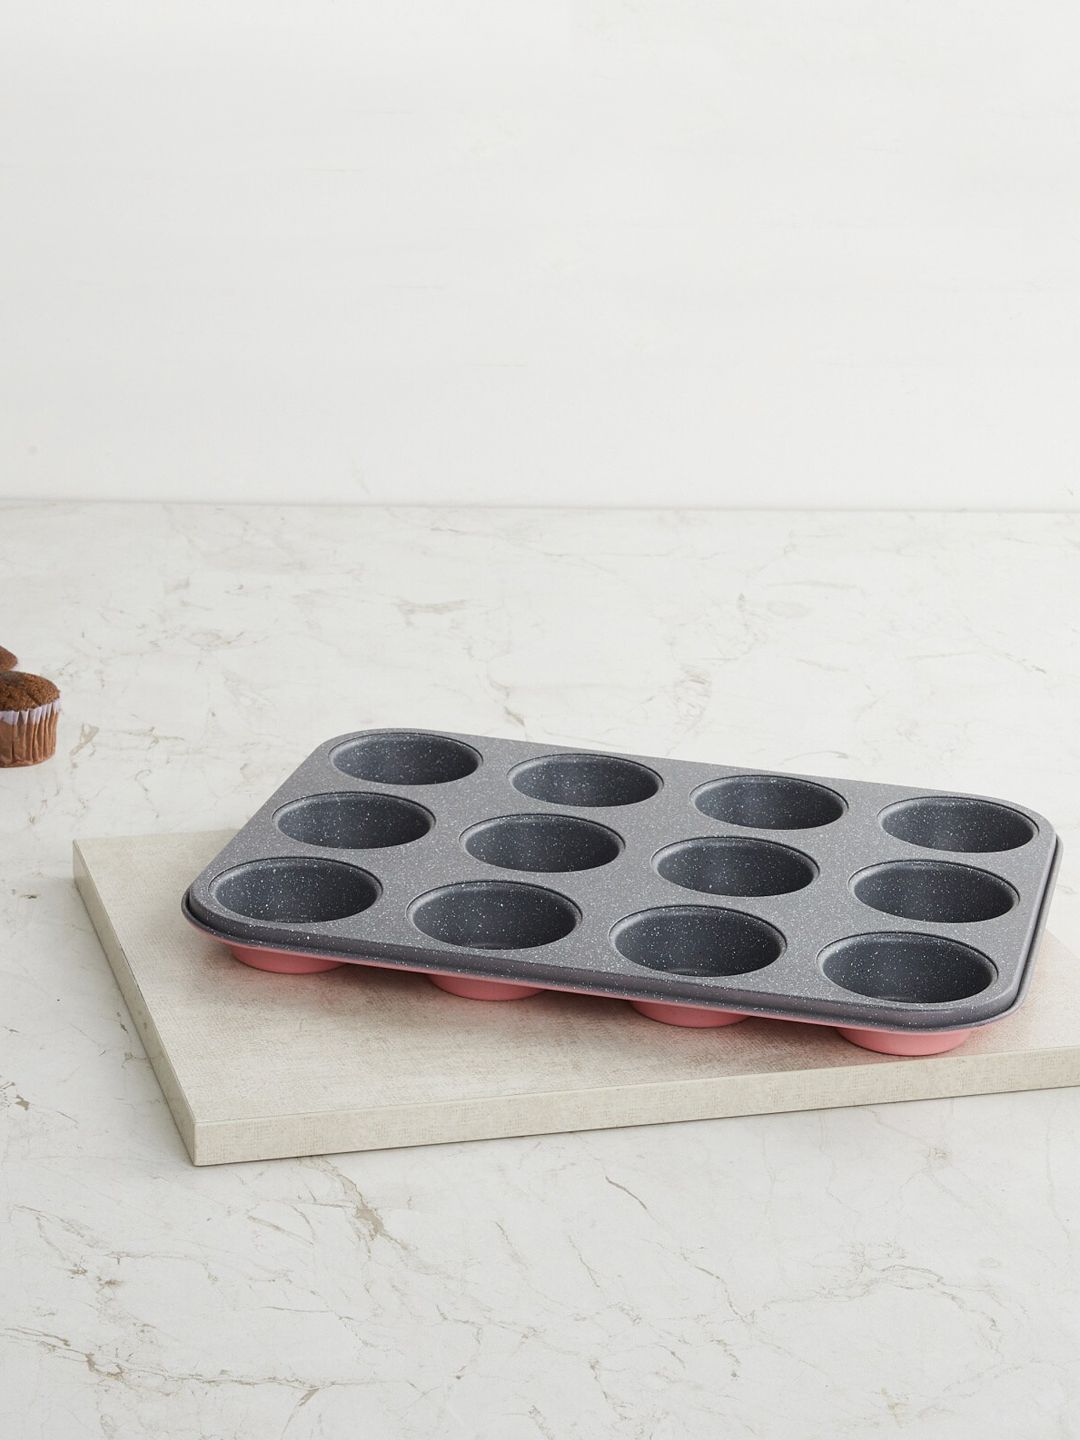 Home Centre Assorted Carbon Steel Bakeware Price in India